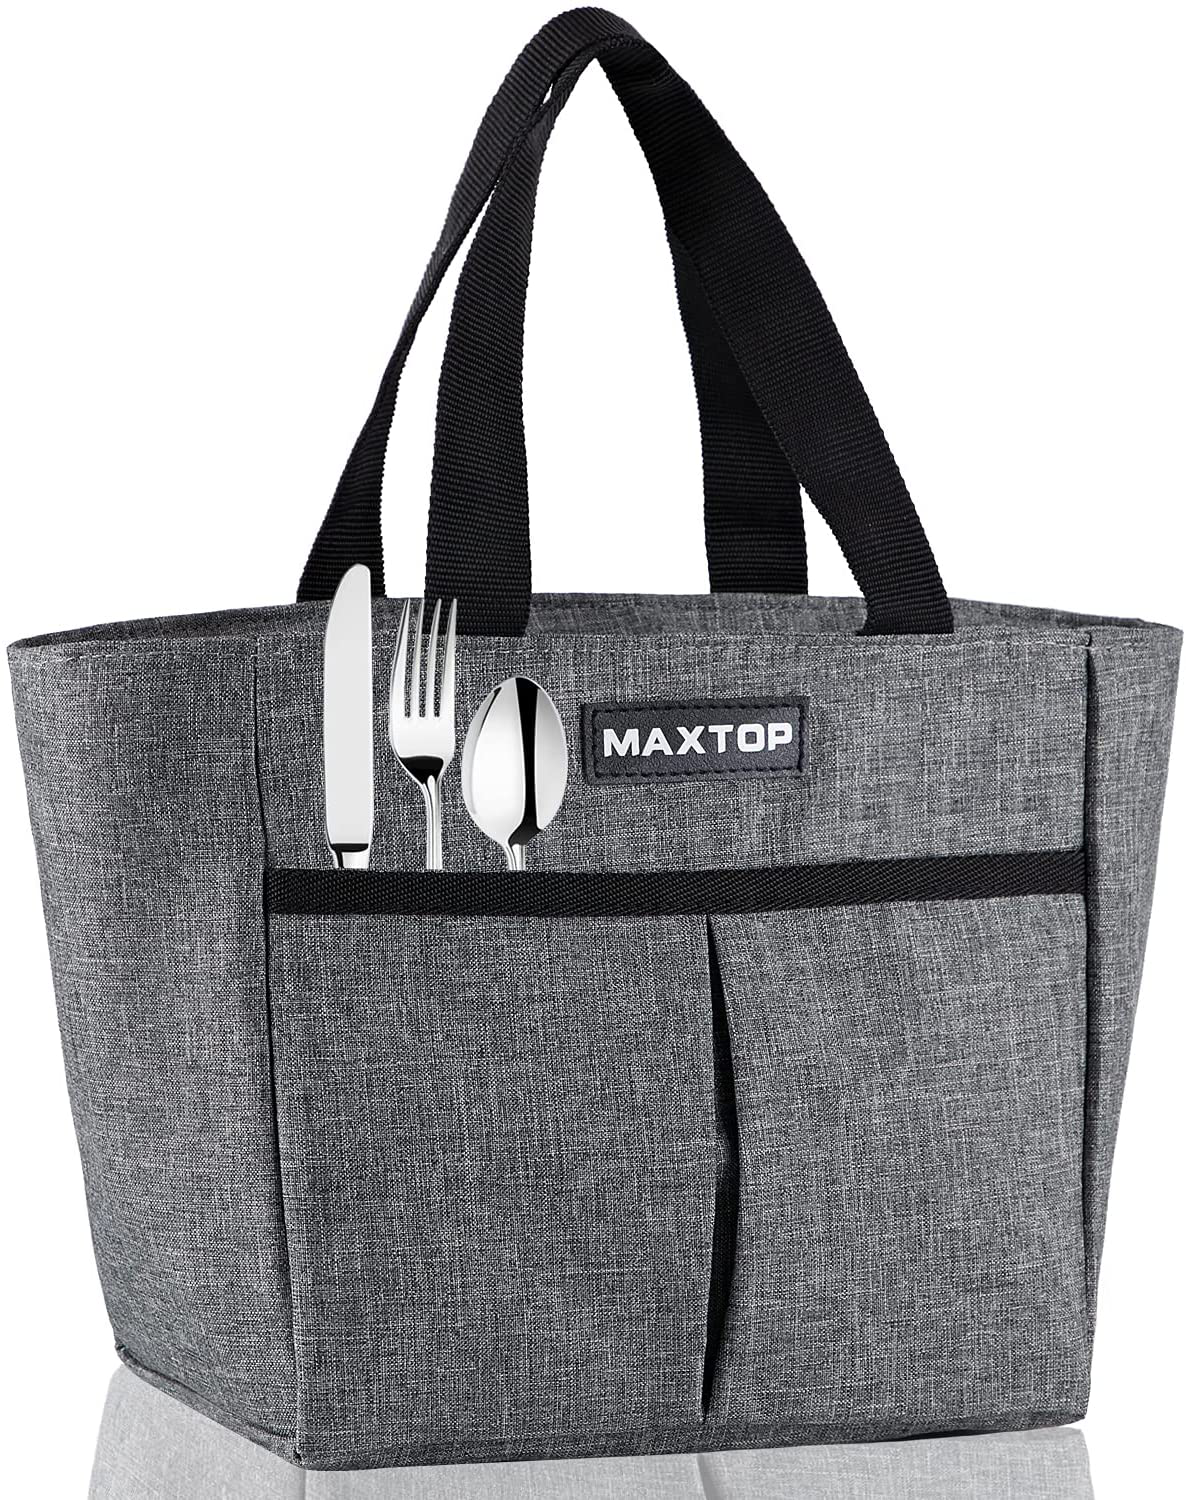 MAXTOP Lunch Bags for Women,Insulated Thermal Lunch Tote Bag,Lunch Box with Front Pocket for Office Work Picnic Shopping (Light Blue, Small)